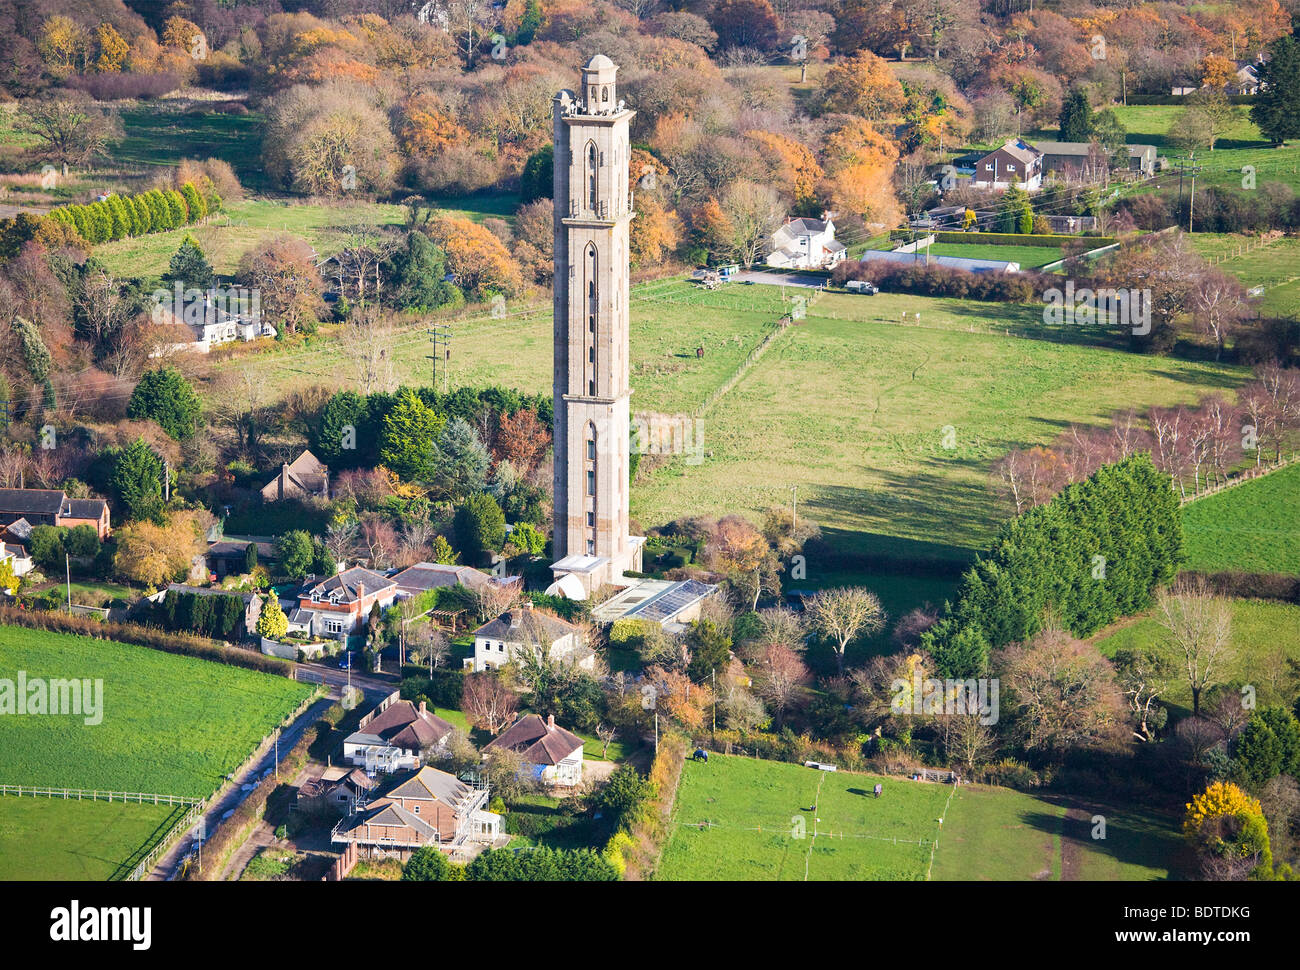 Aerial view of Sway Folly Tower, also known as Peterson's Folly.  Sway, Hampshire. UK.  Autumn. Stock Photo